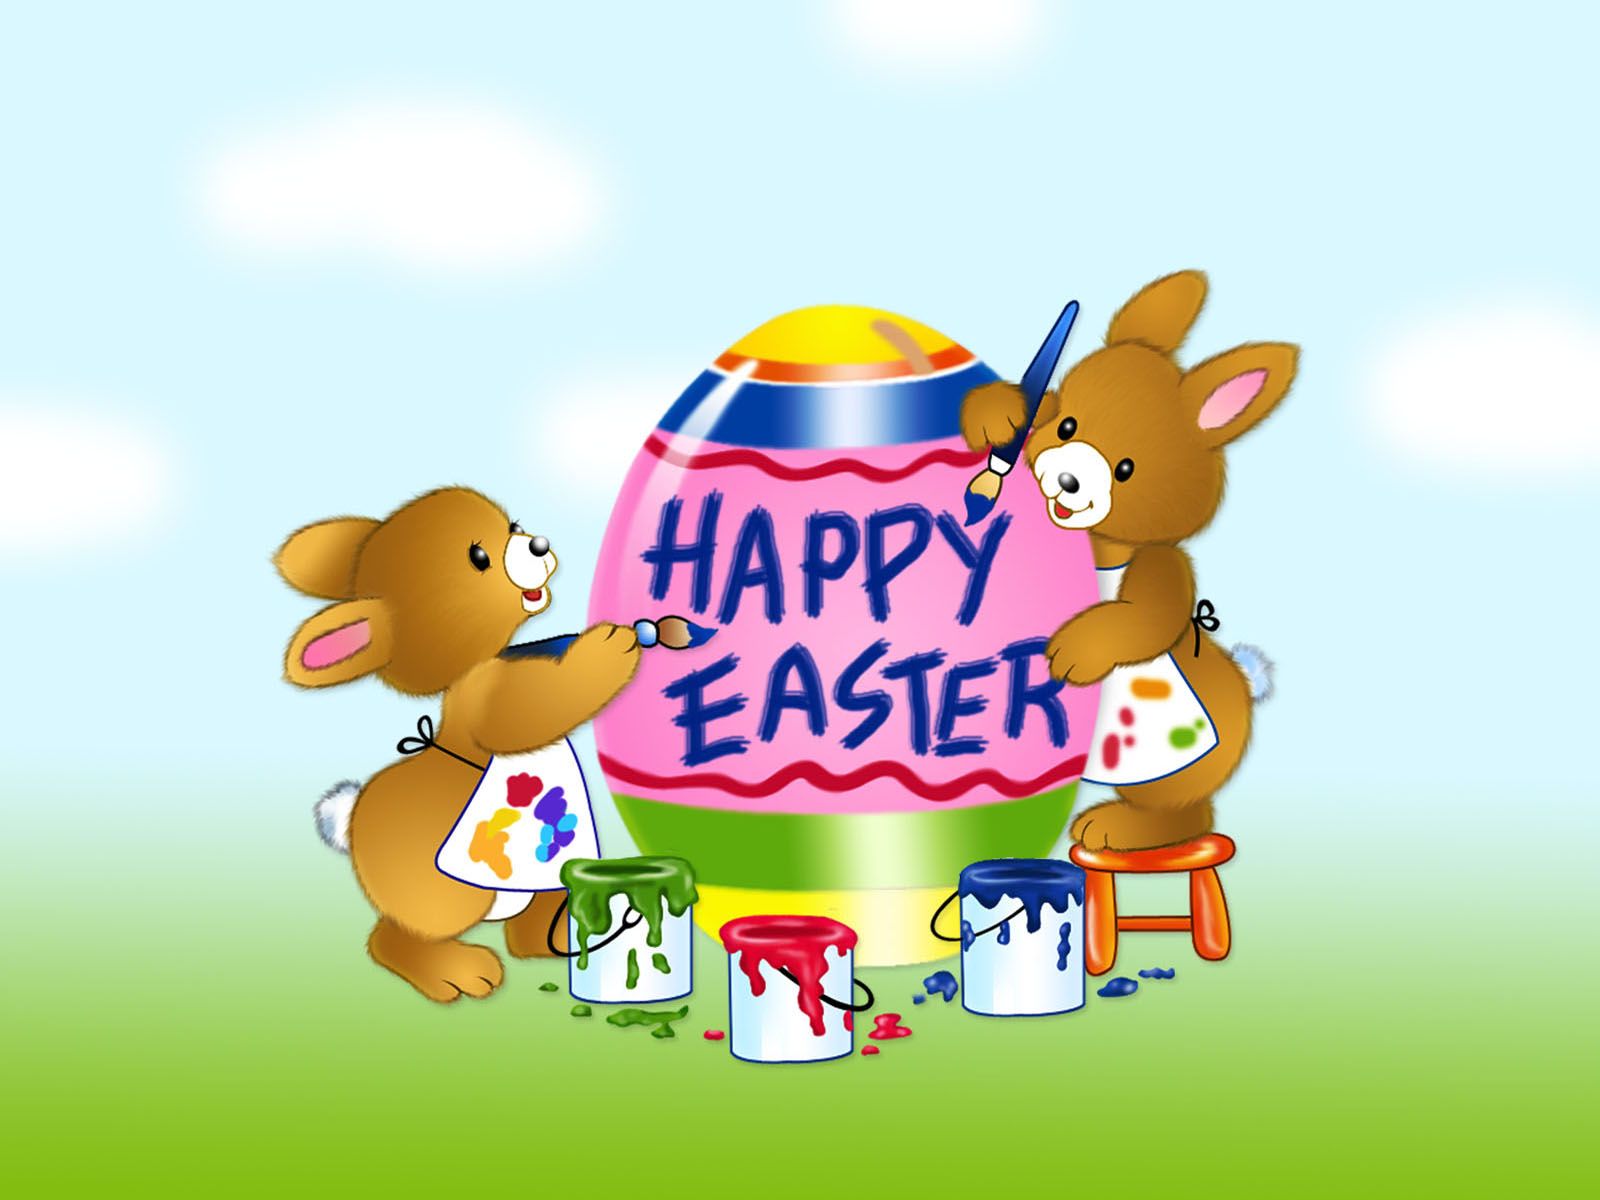 Free Easter Picture Free, Download Free Clip Art, Free Clip Art